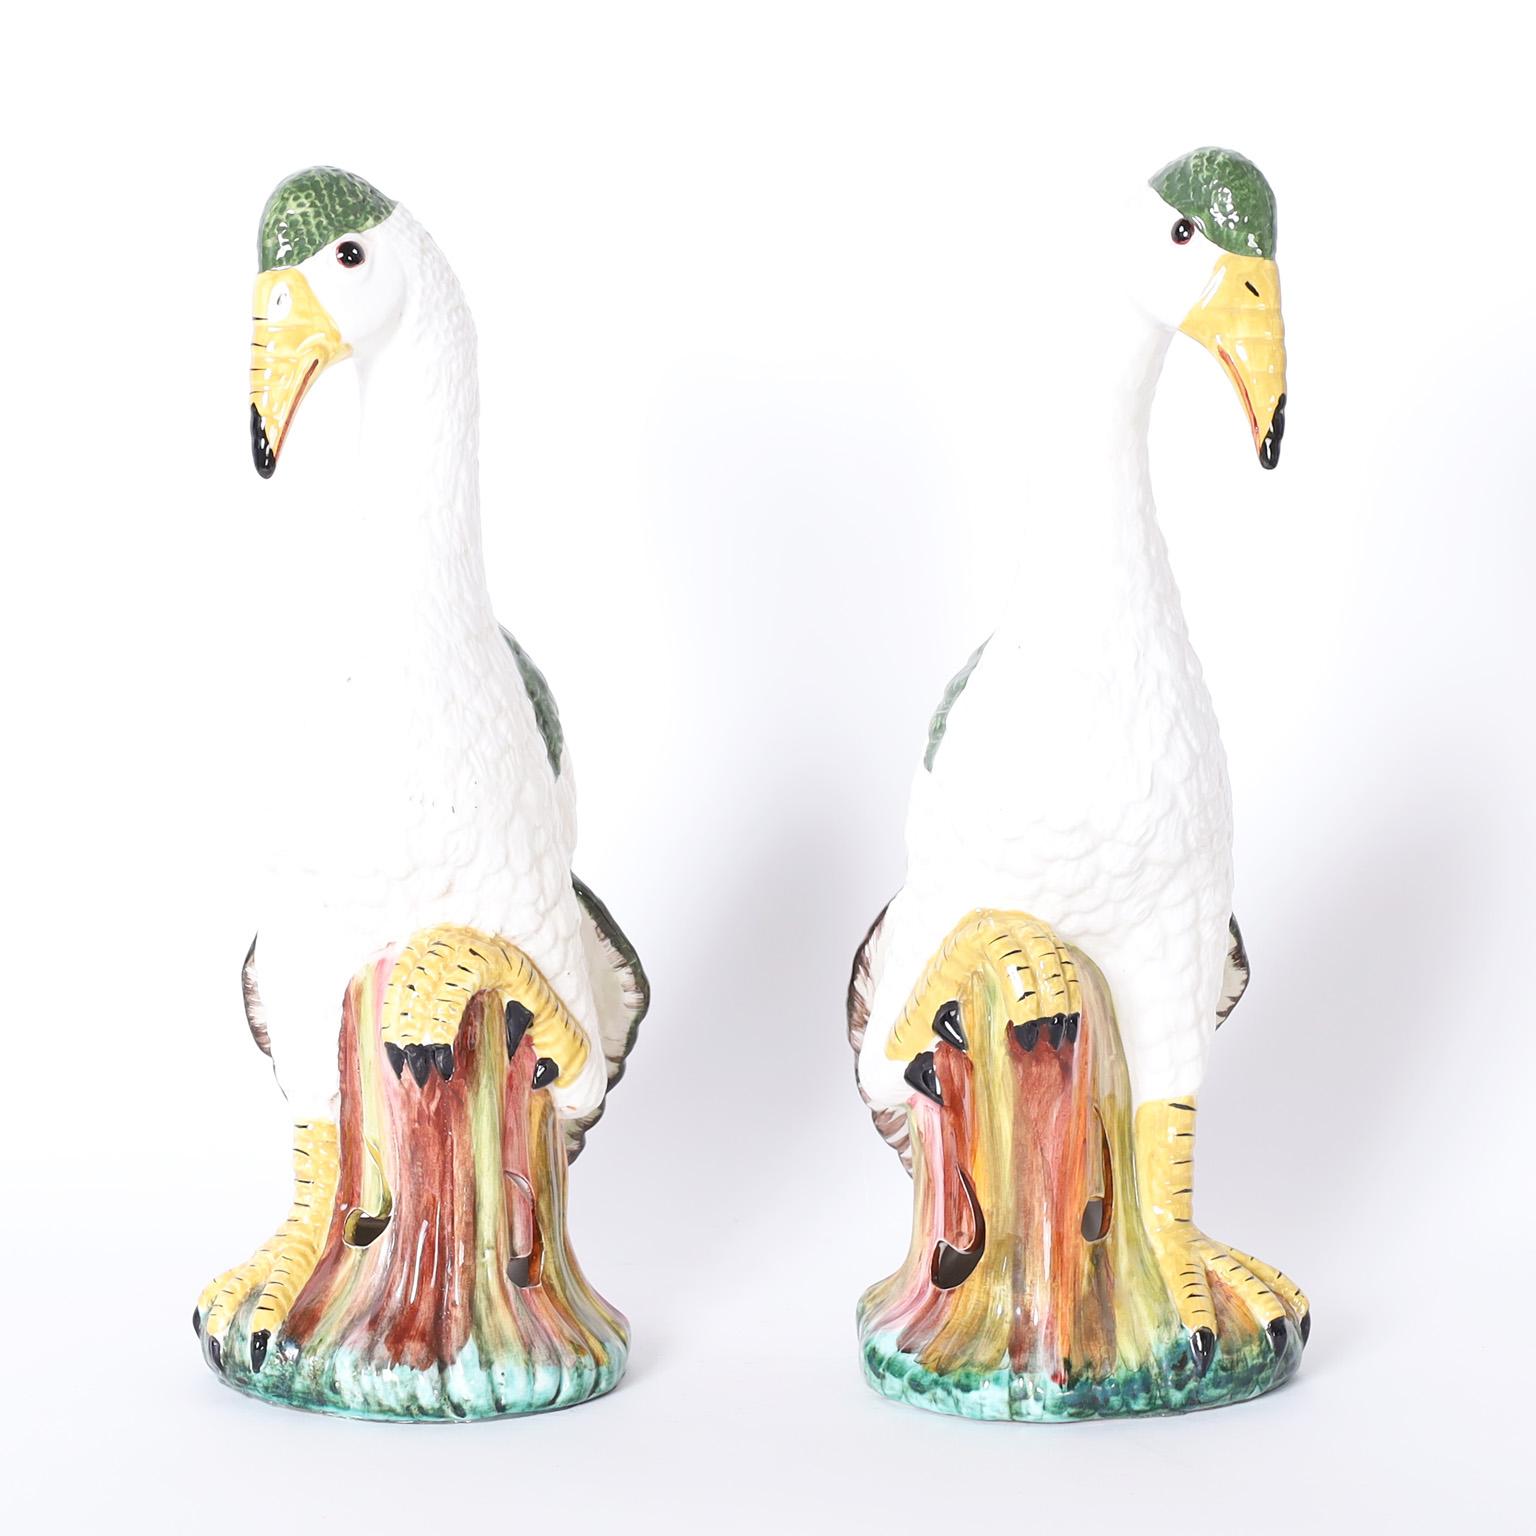 Pair of Italian decorative majolica ceramic or porcelain birds, decorated and glazed. Signed Meiselman on the bottom.